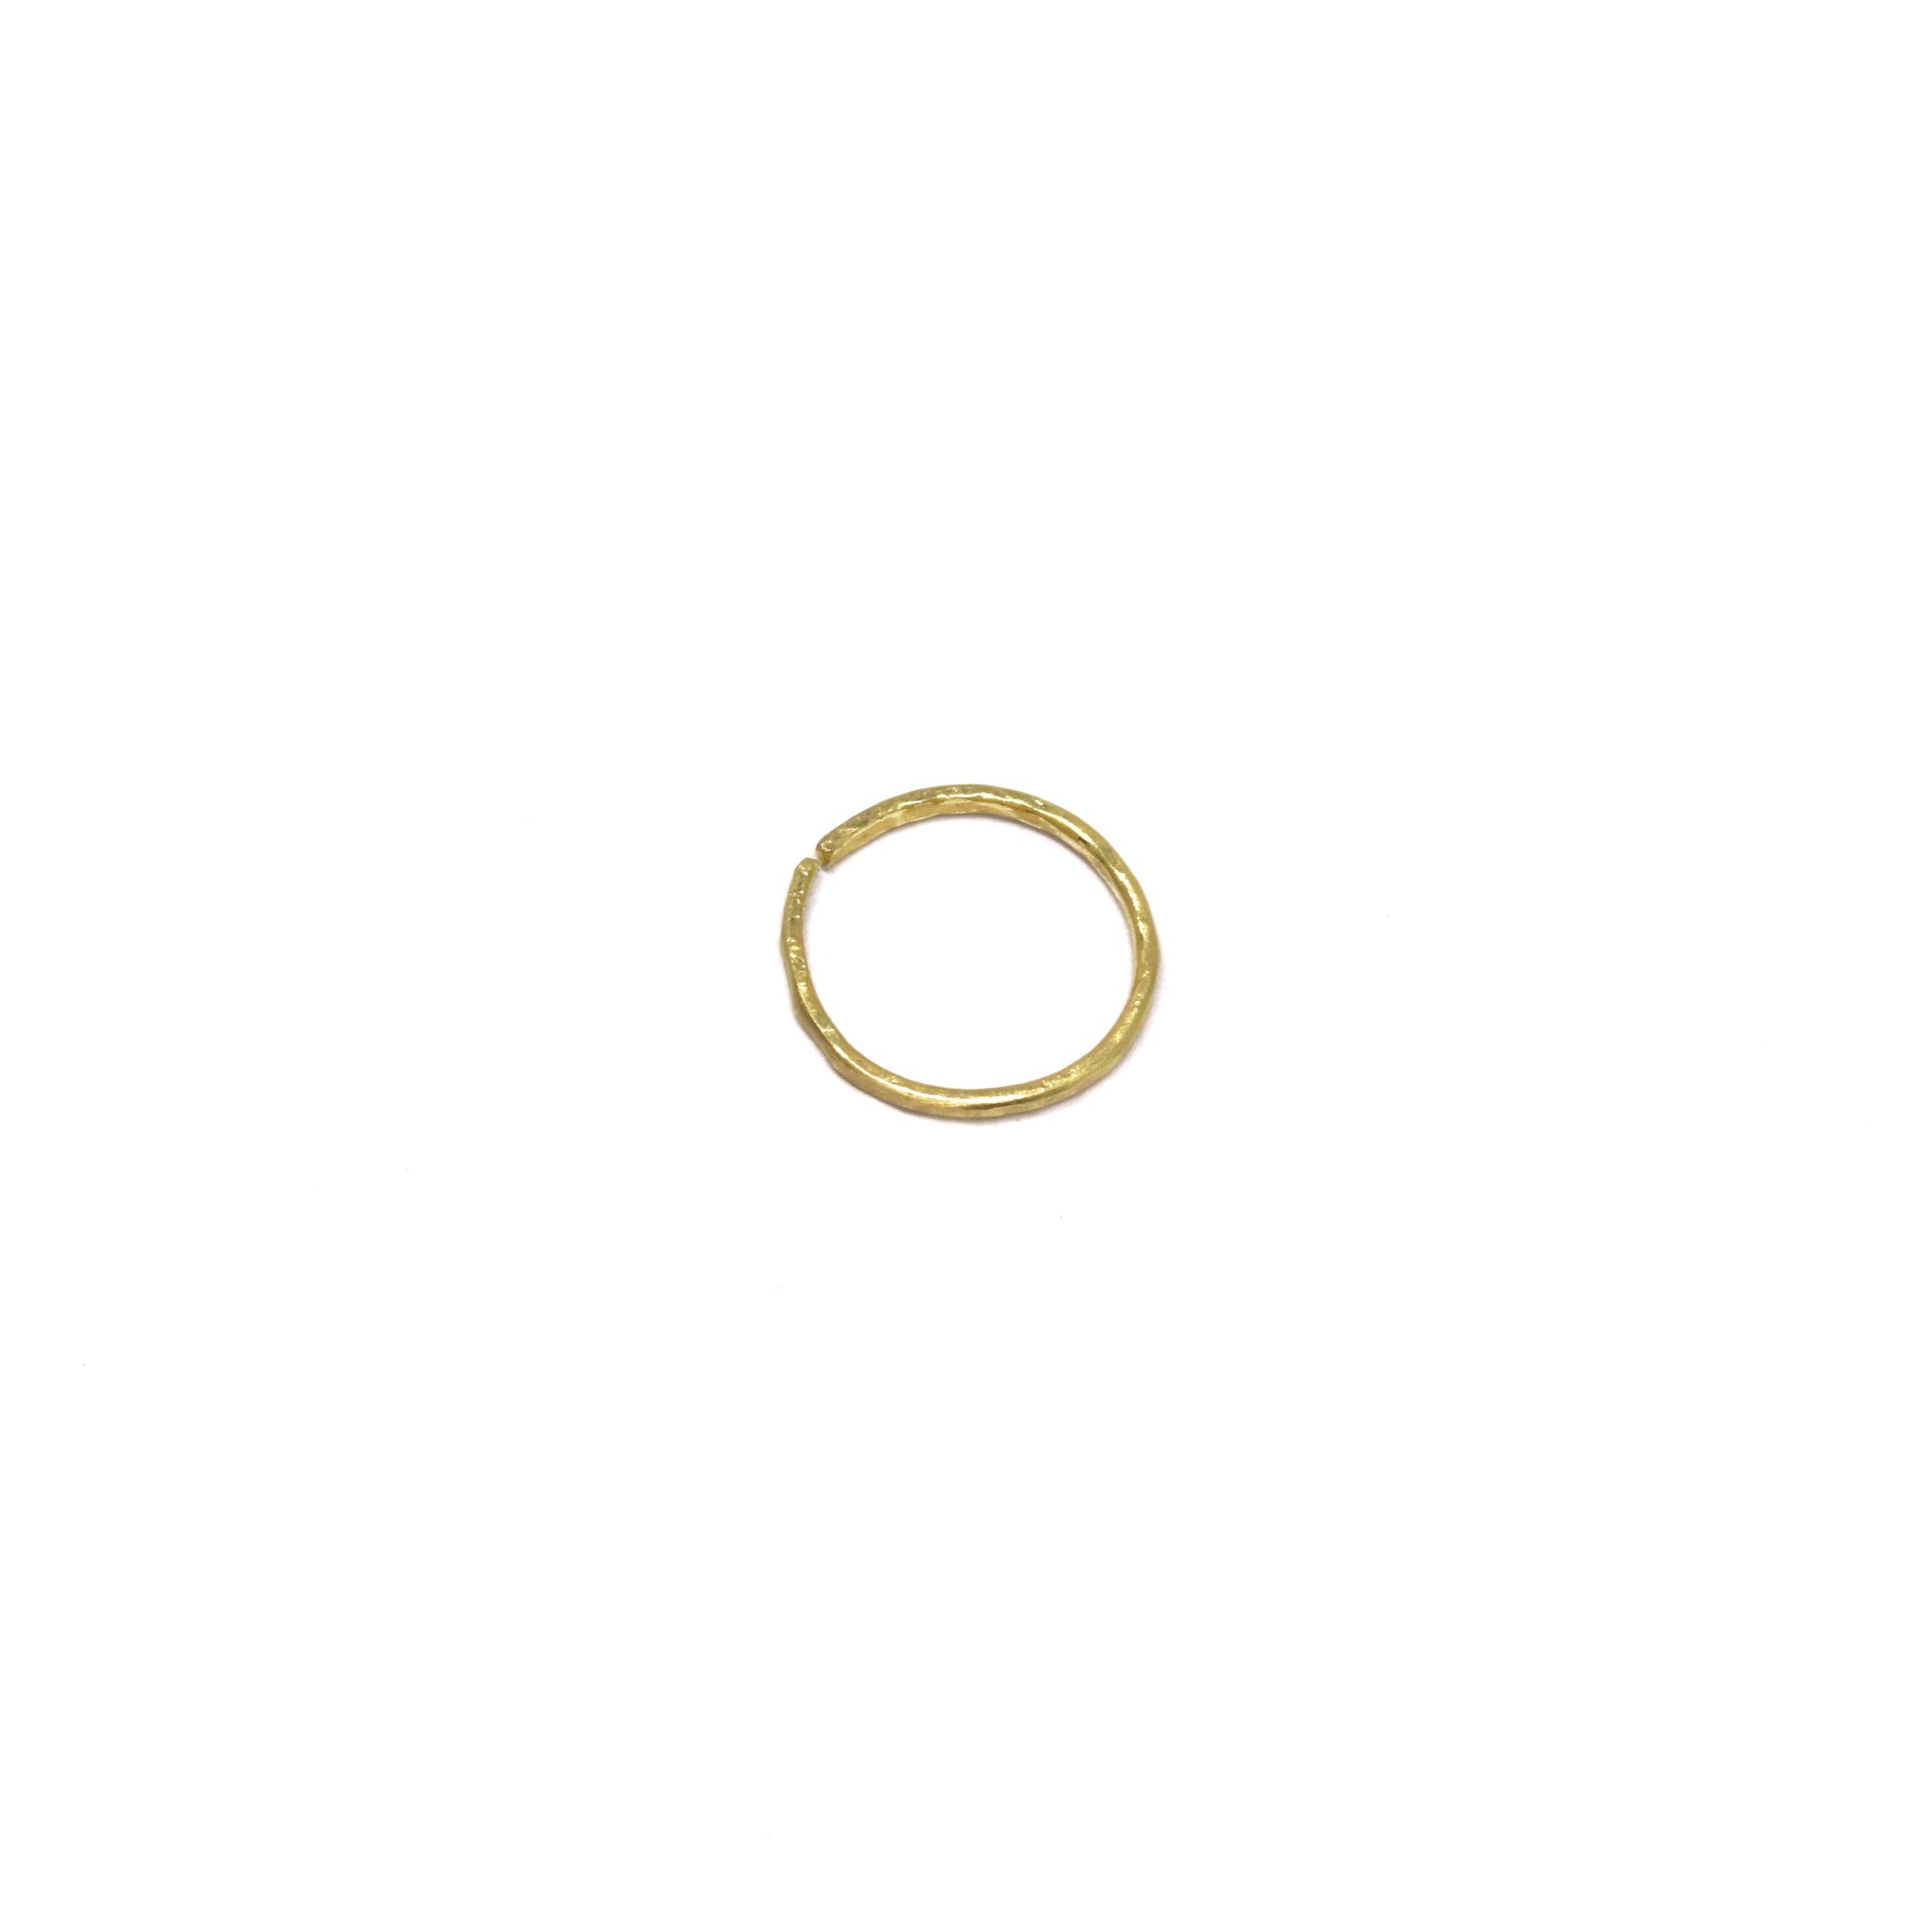 Hand forged gold nose ring. Made in Wanaka, New Zealand.